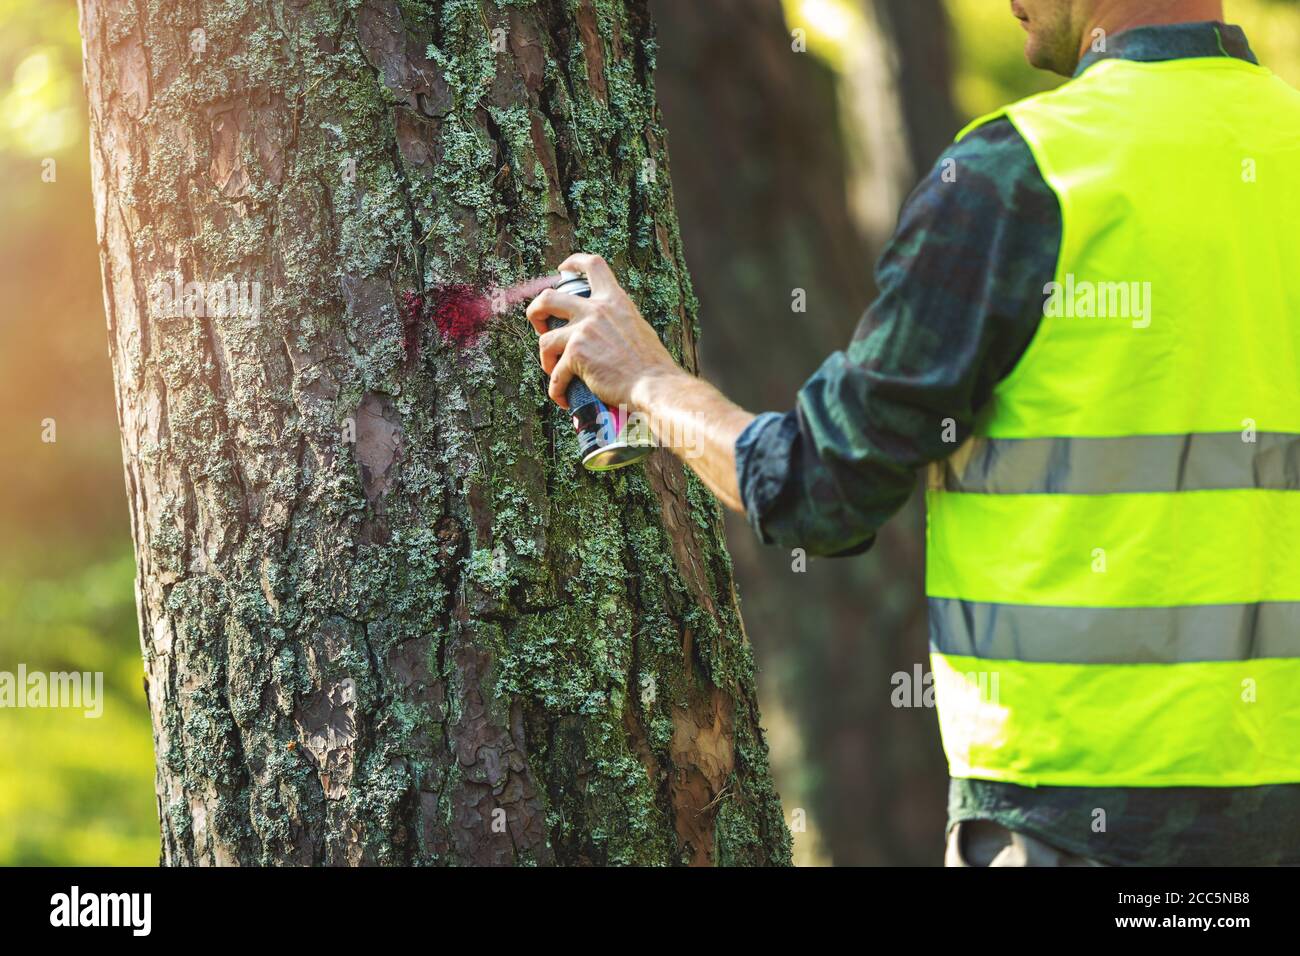 logging industry - forestry engineer marking tree trunk with red spray for cutting in deforestation process Stock Photo